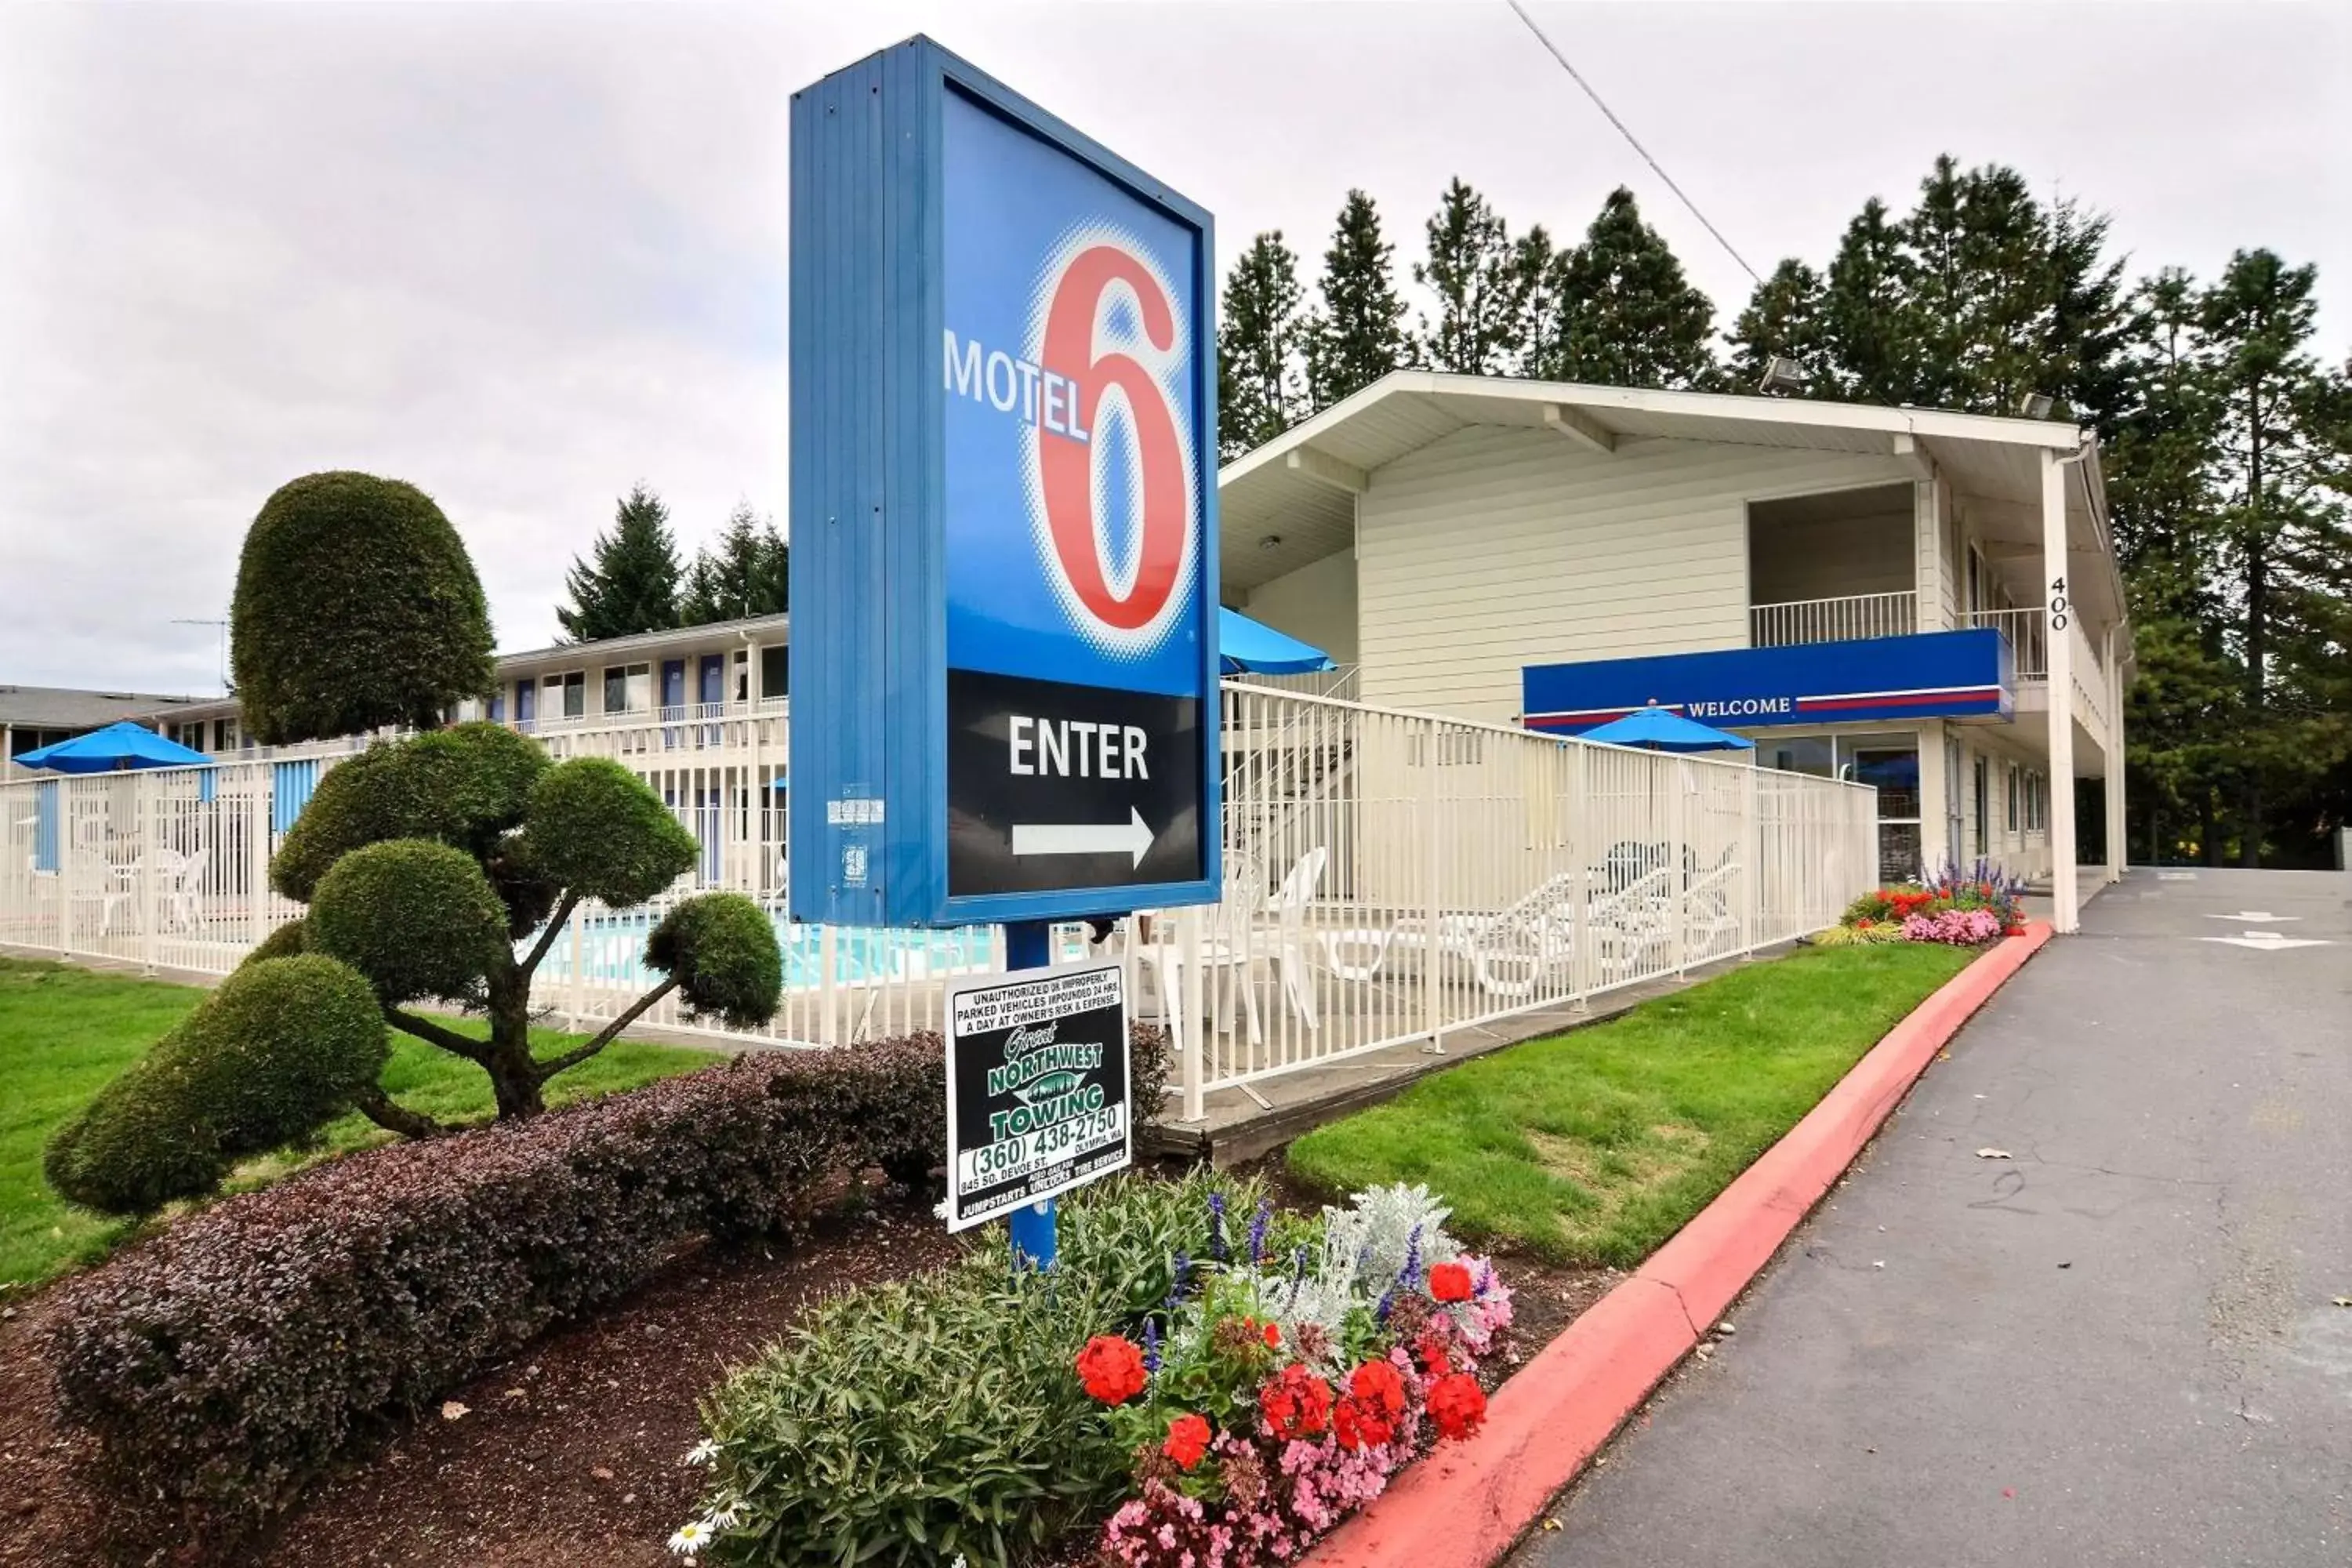 Property building in Motel 6-Tumwater, WA - Olympia